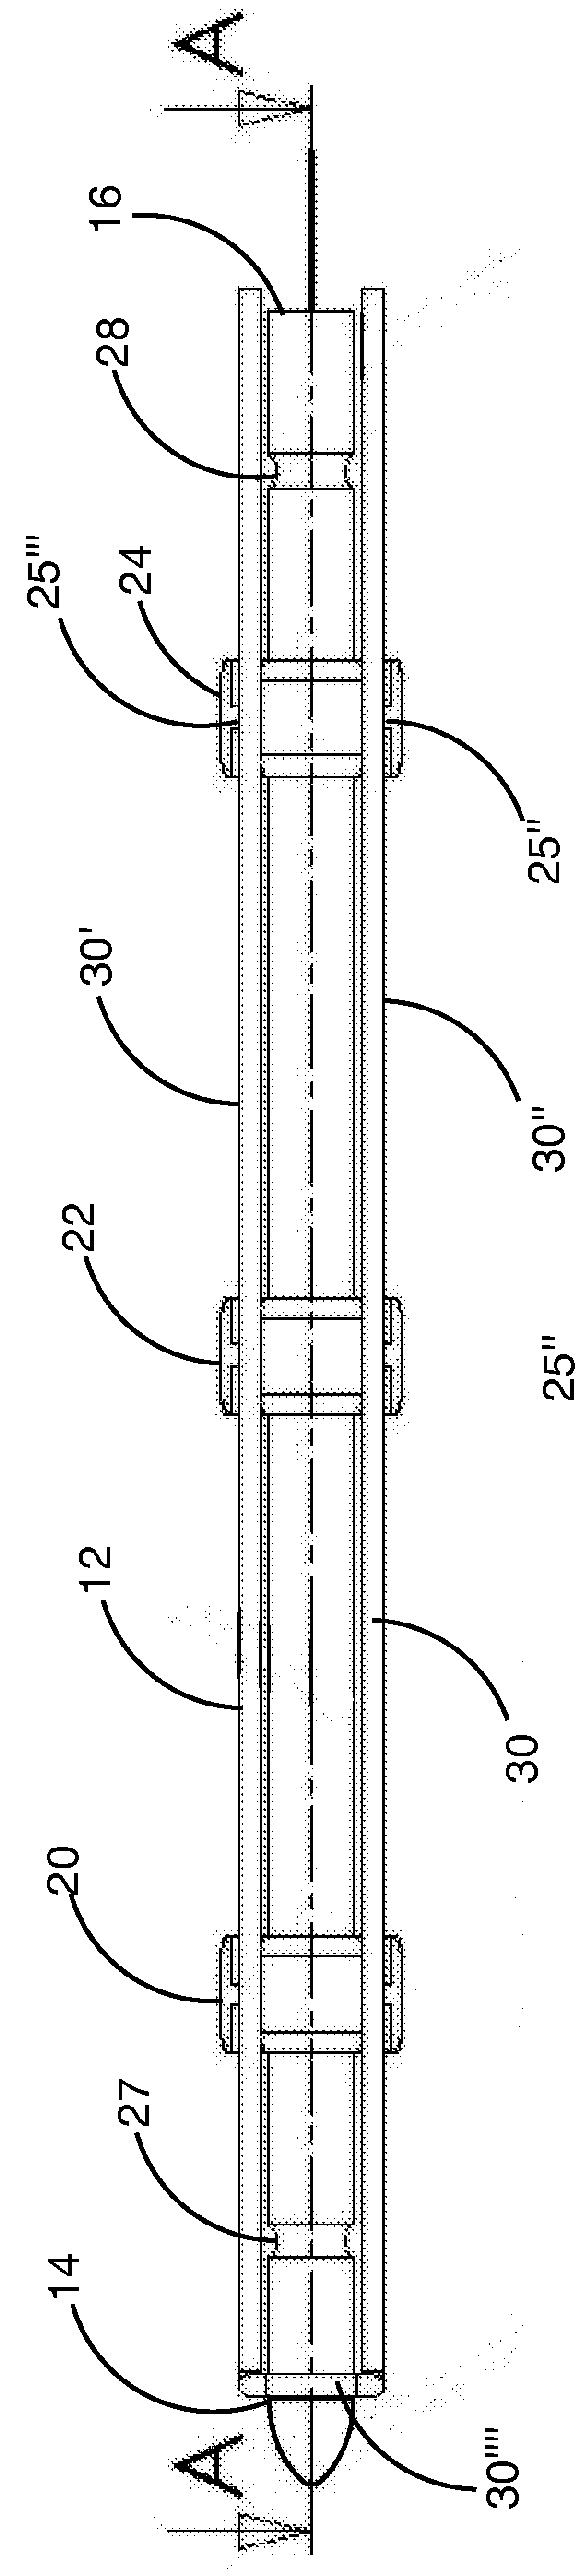 Hot hole charge system and related methods